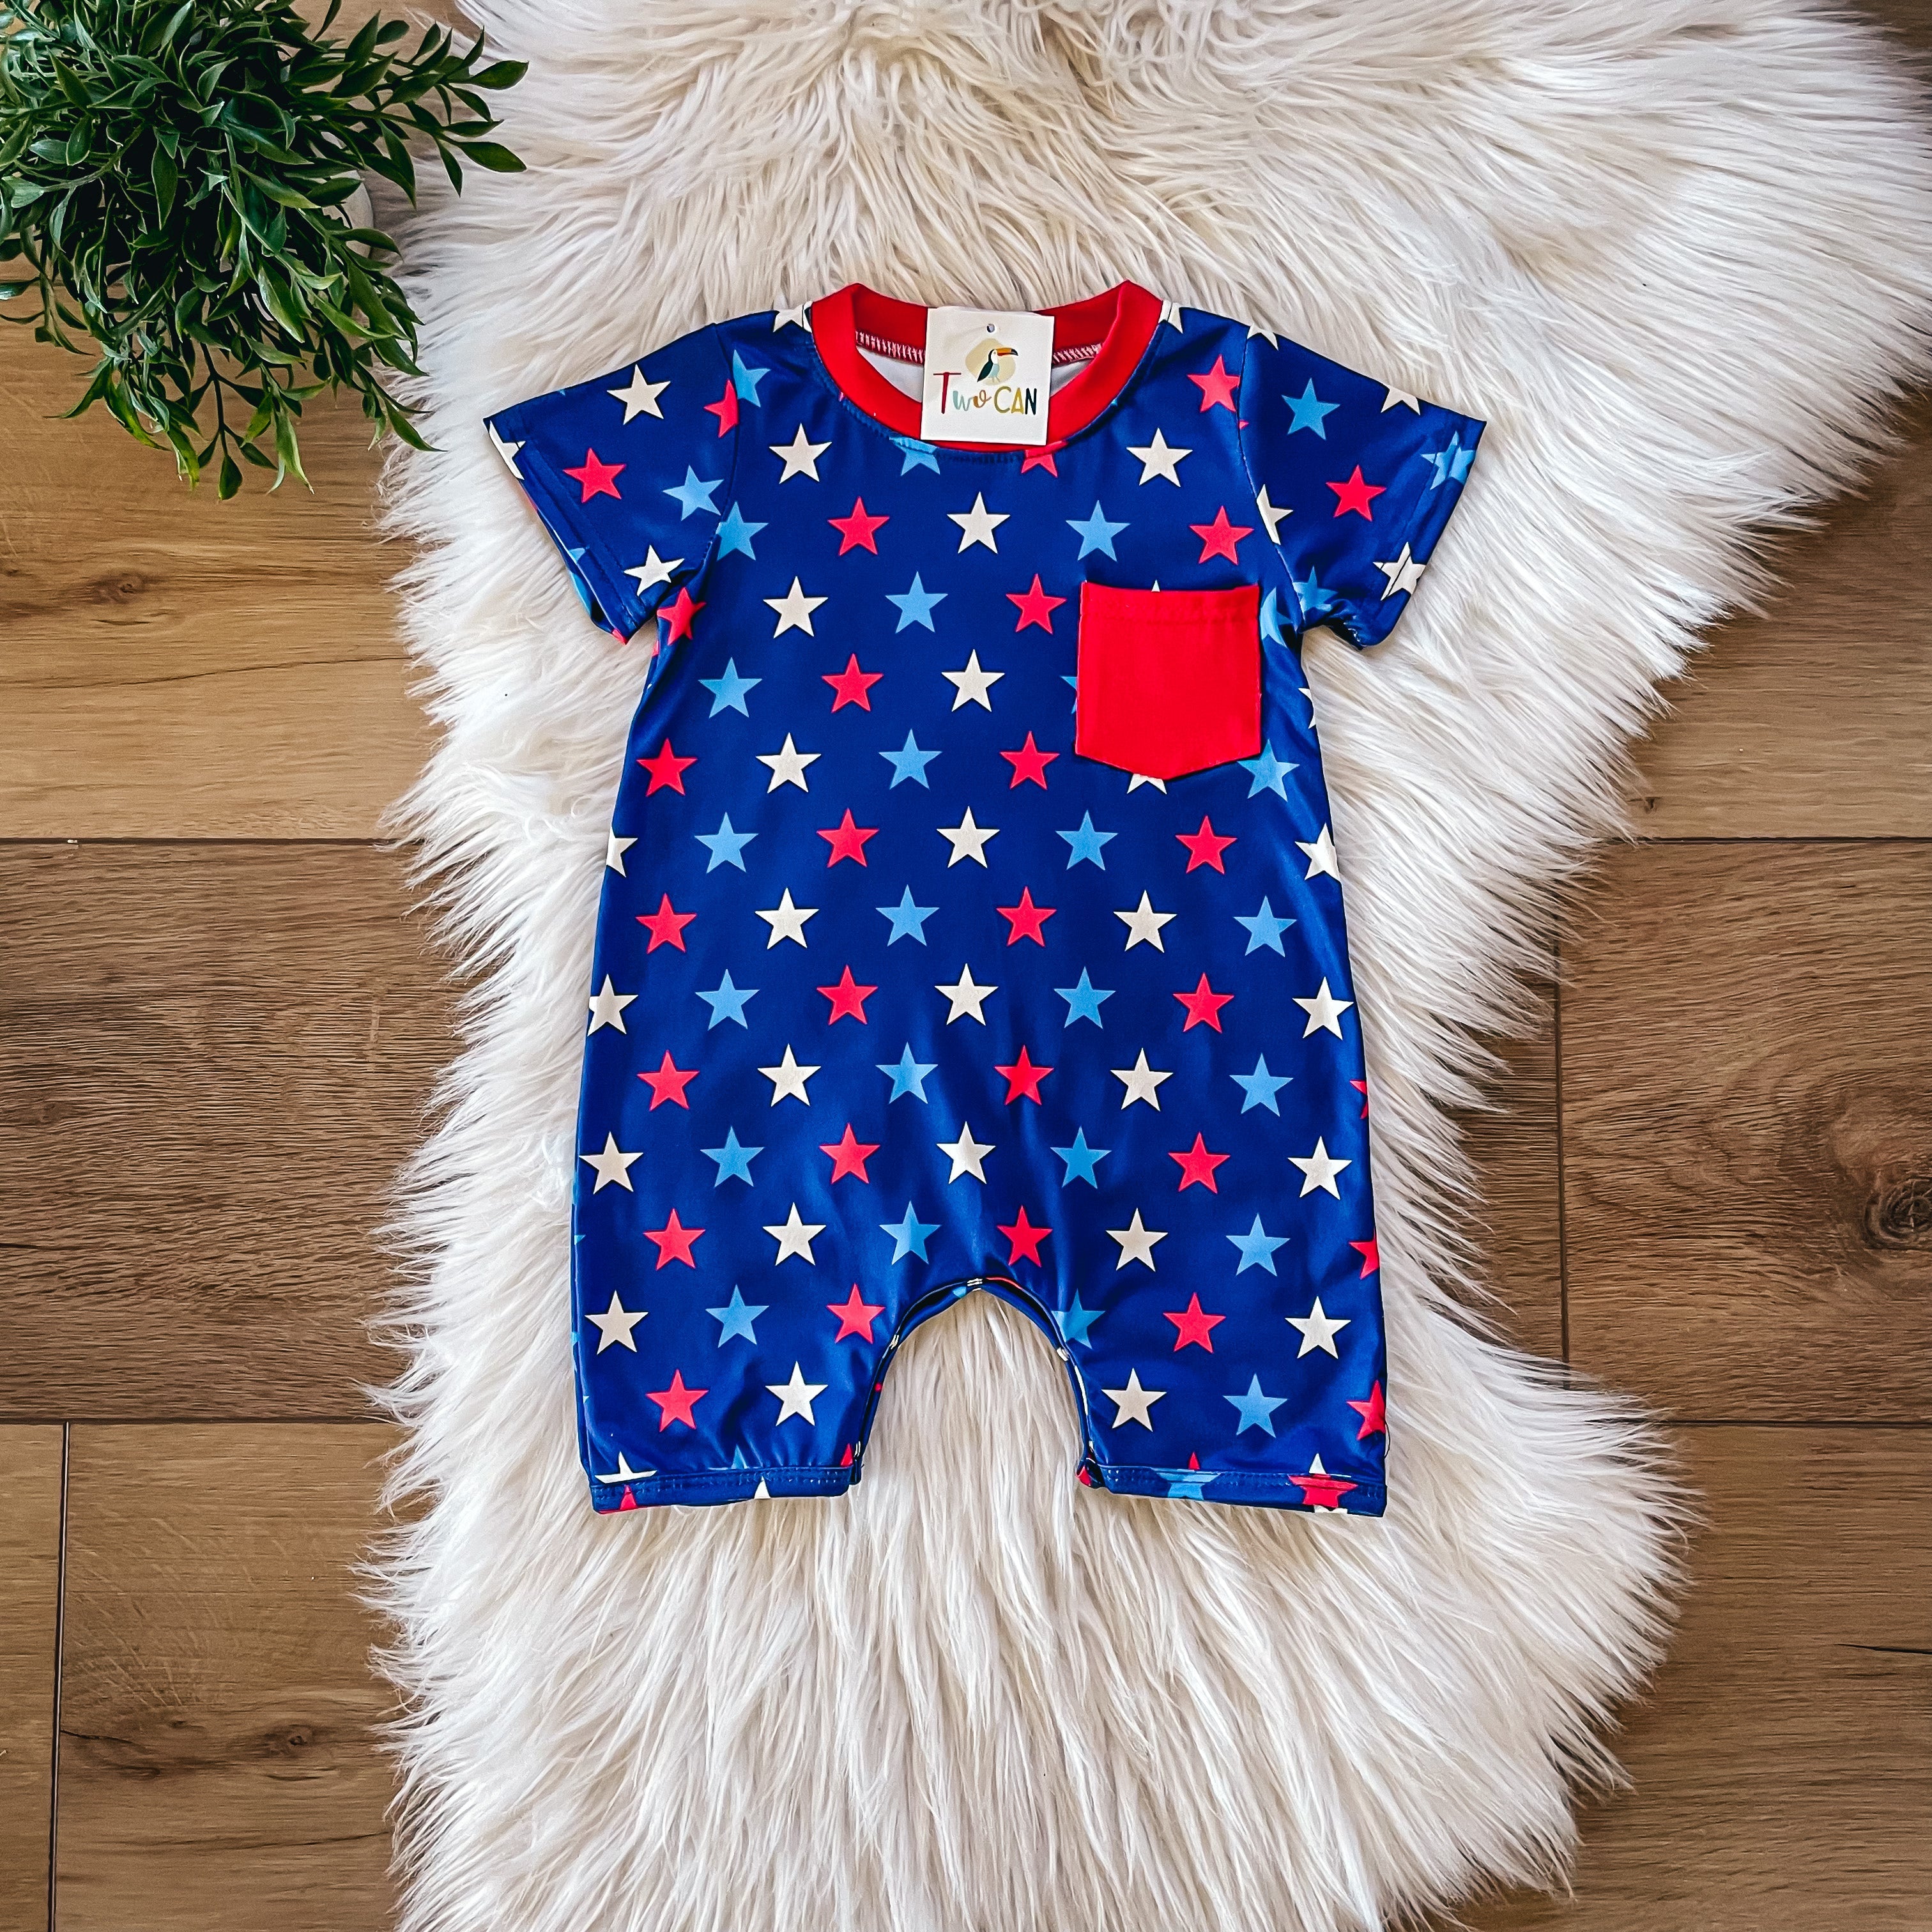 Navy Stars Baby Romper by Twocan